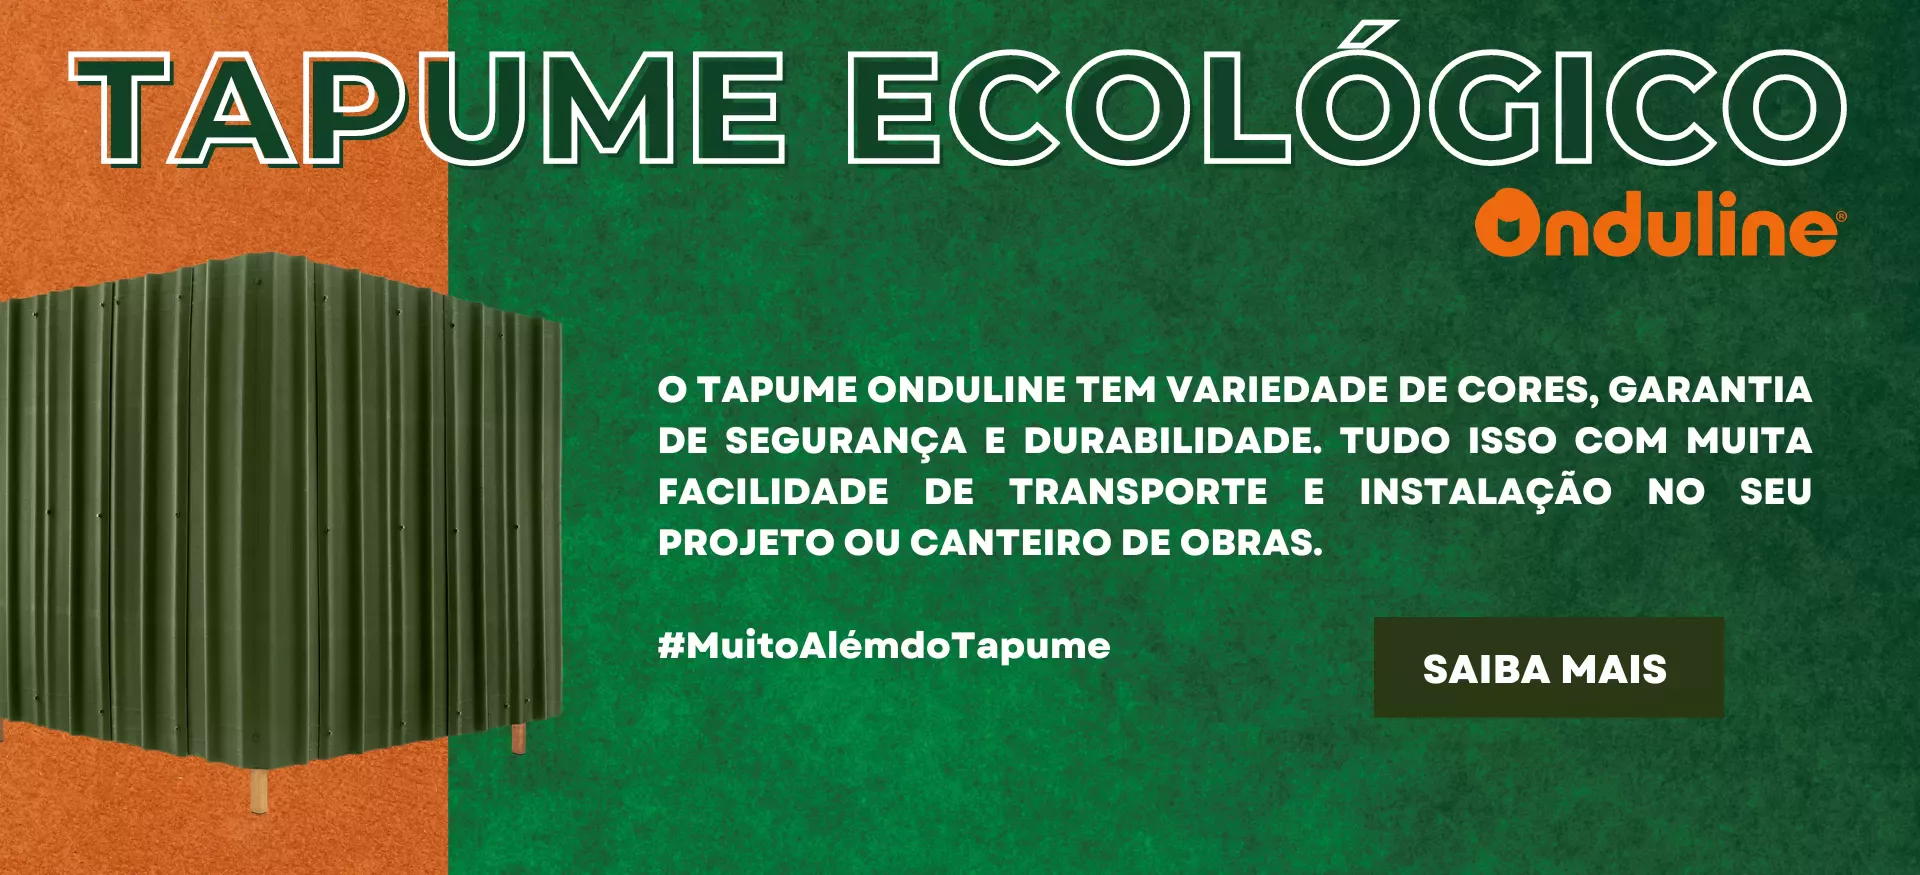 tapume ecologico